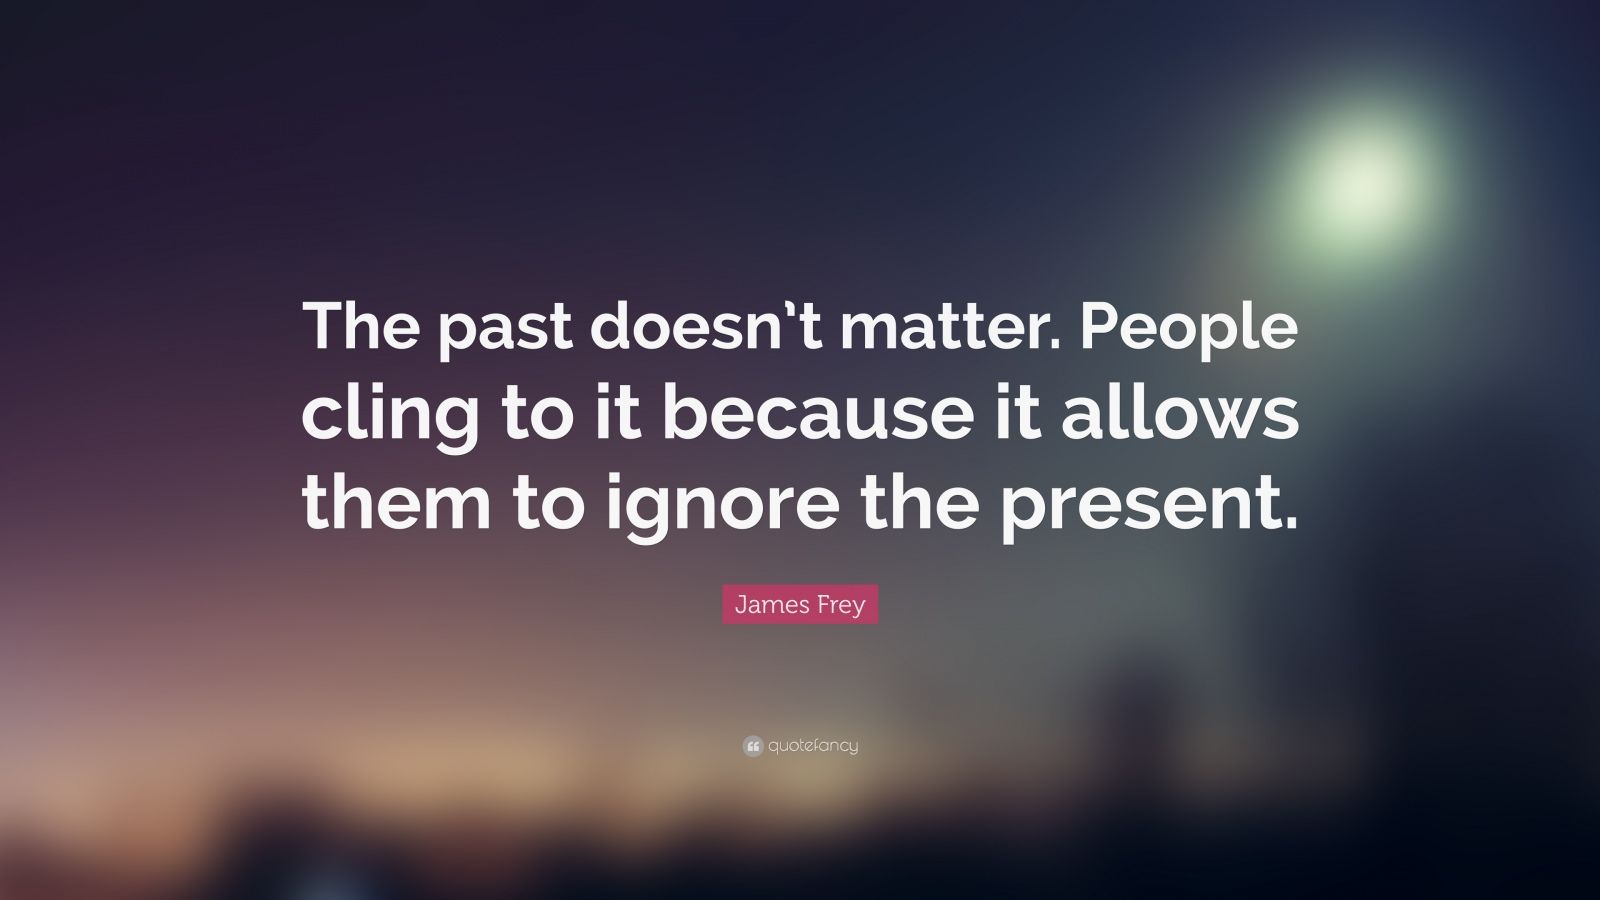 James Frey Quote: “The past doesn’t matter. People cling to it because ...